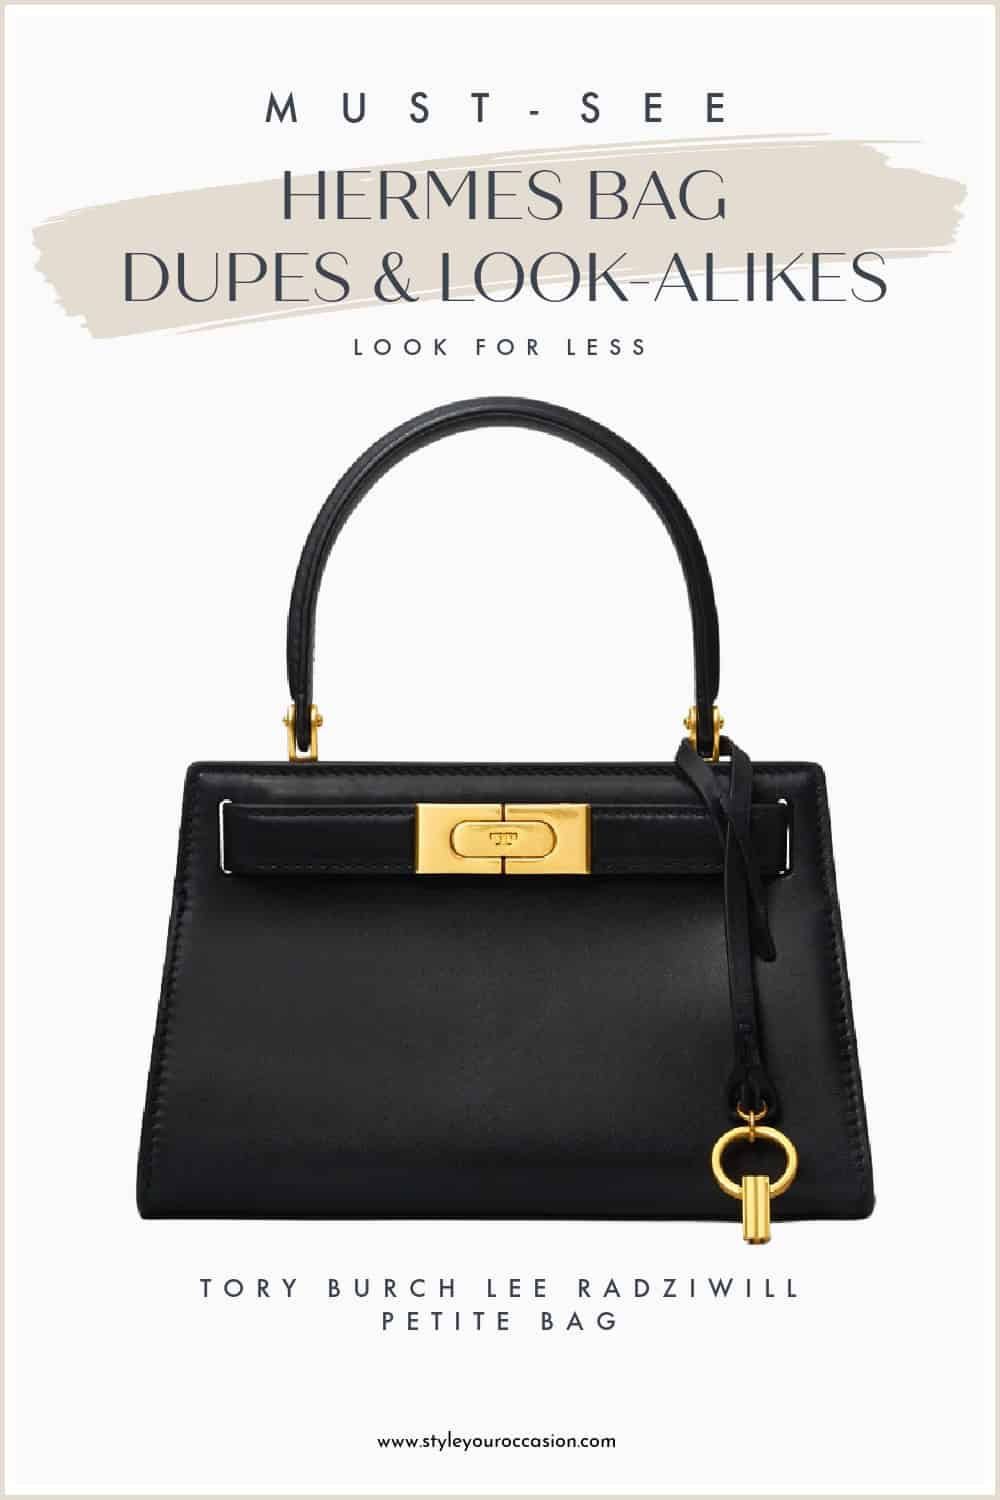 an image board of a black and gold satchel Hermes bag dupe from Tory Burch